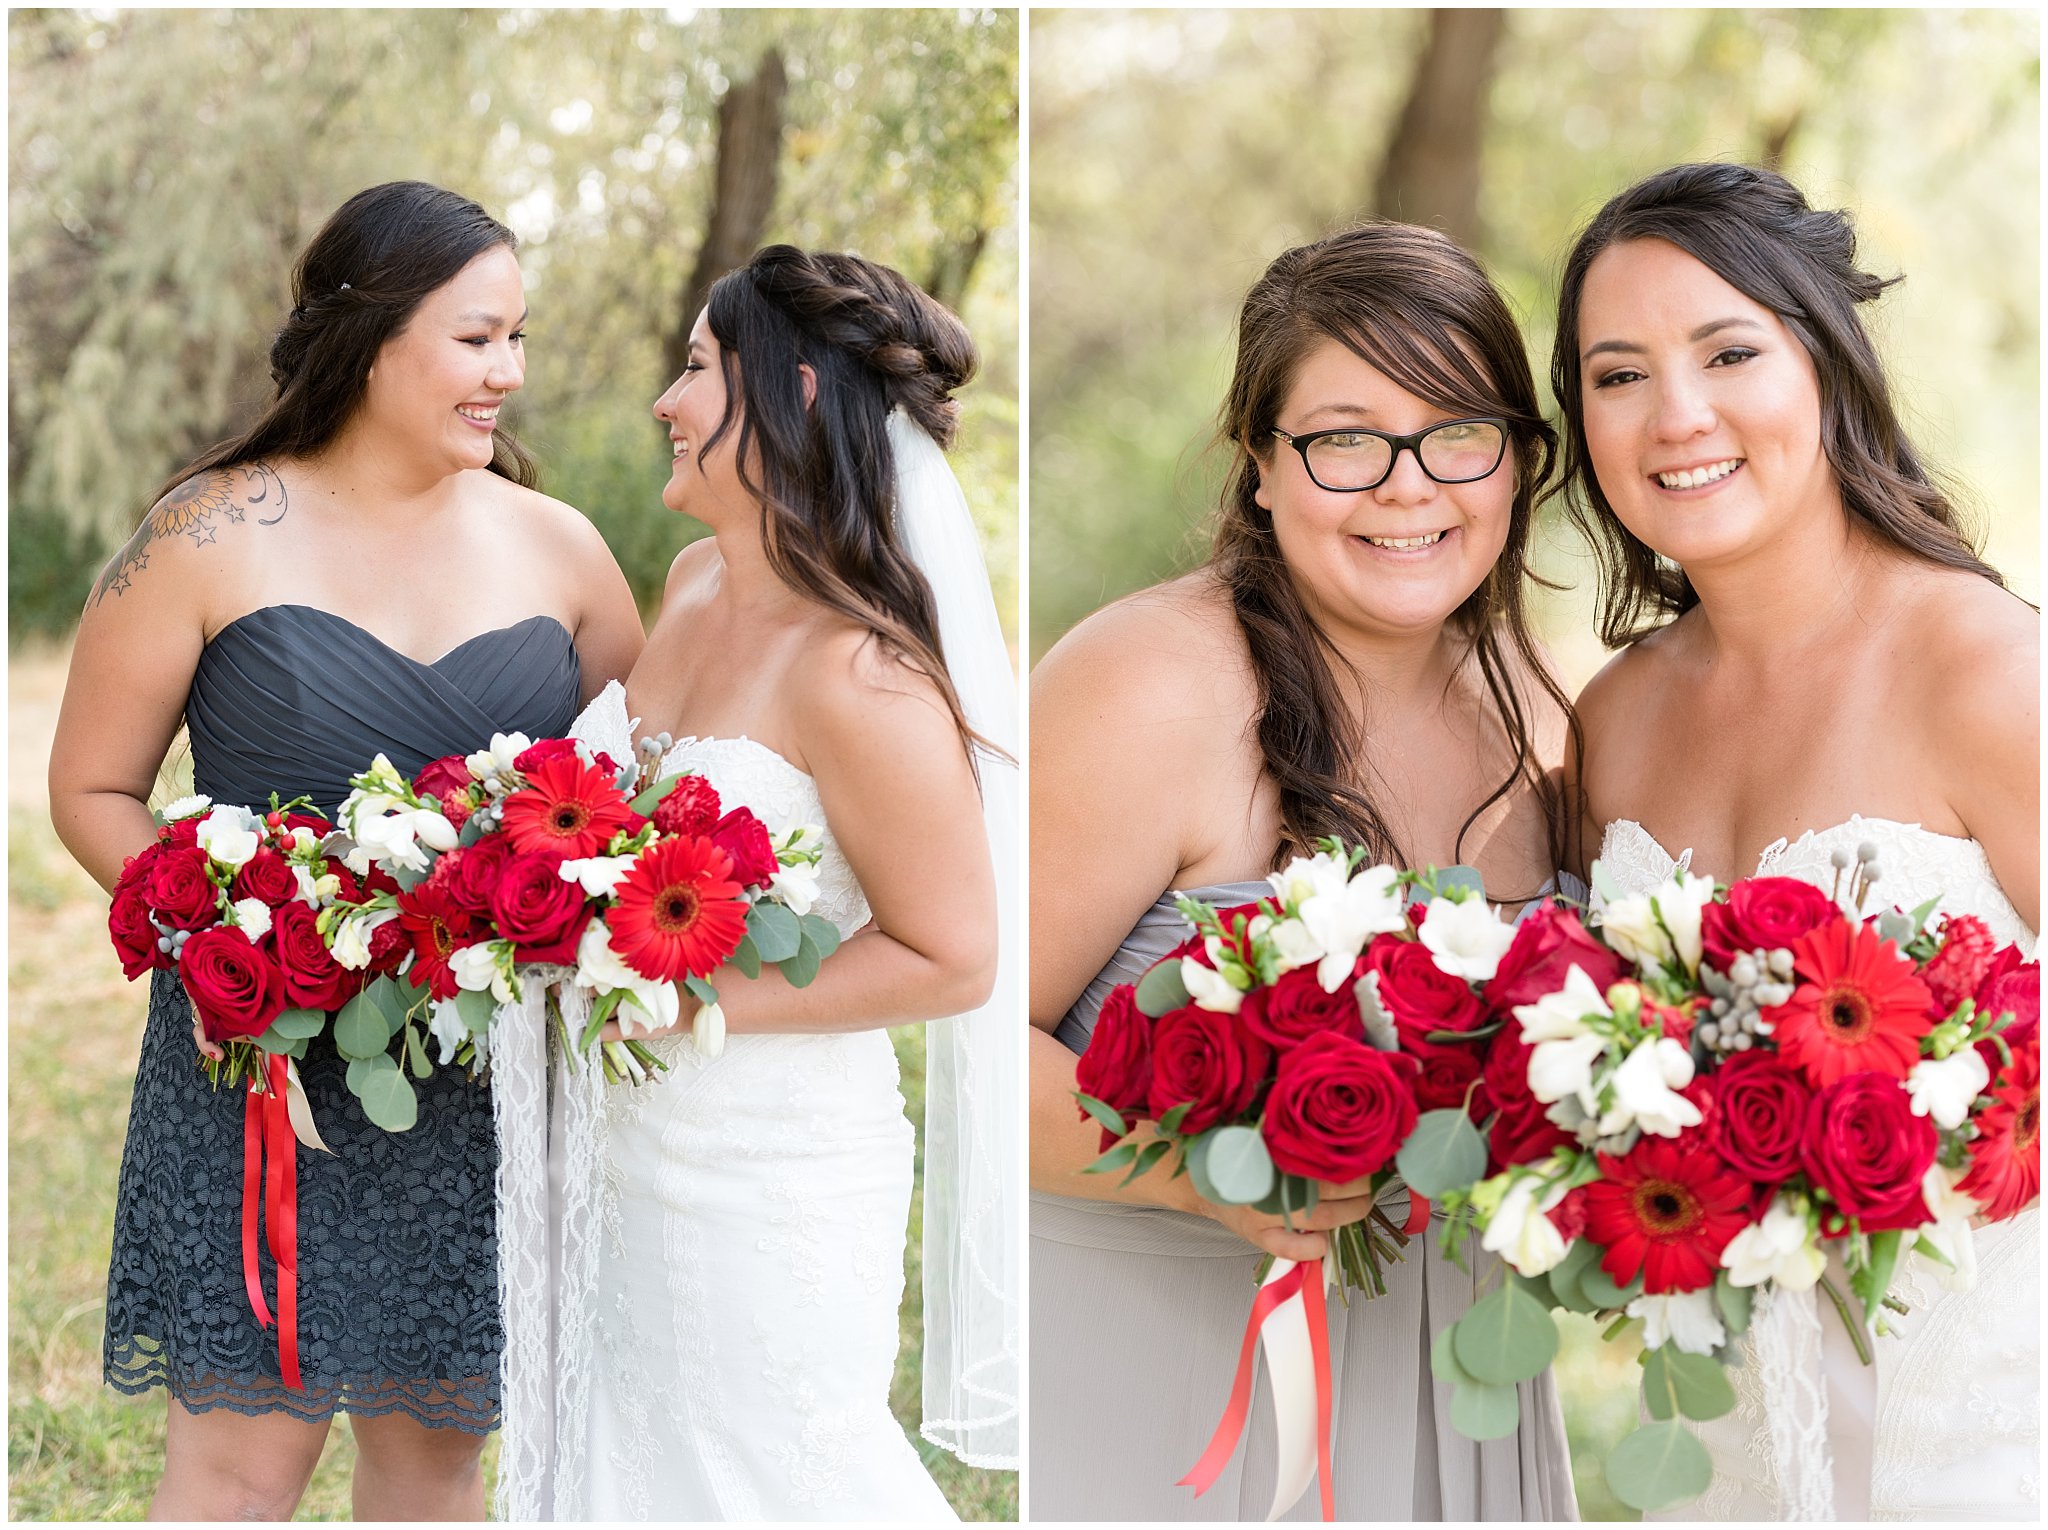 Red and white outdoor wedding | Bride with individual bridesmaids | Davis County Outdoor Wedding | Jessie and Dallin Photography